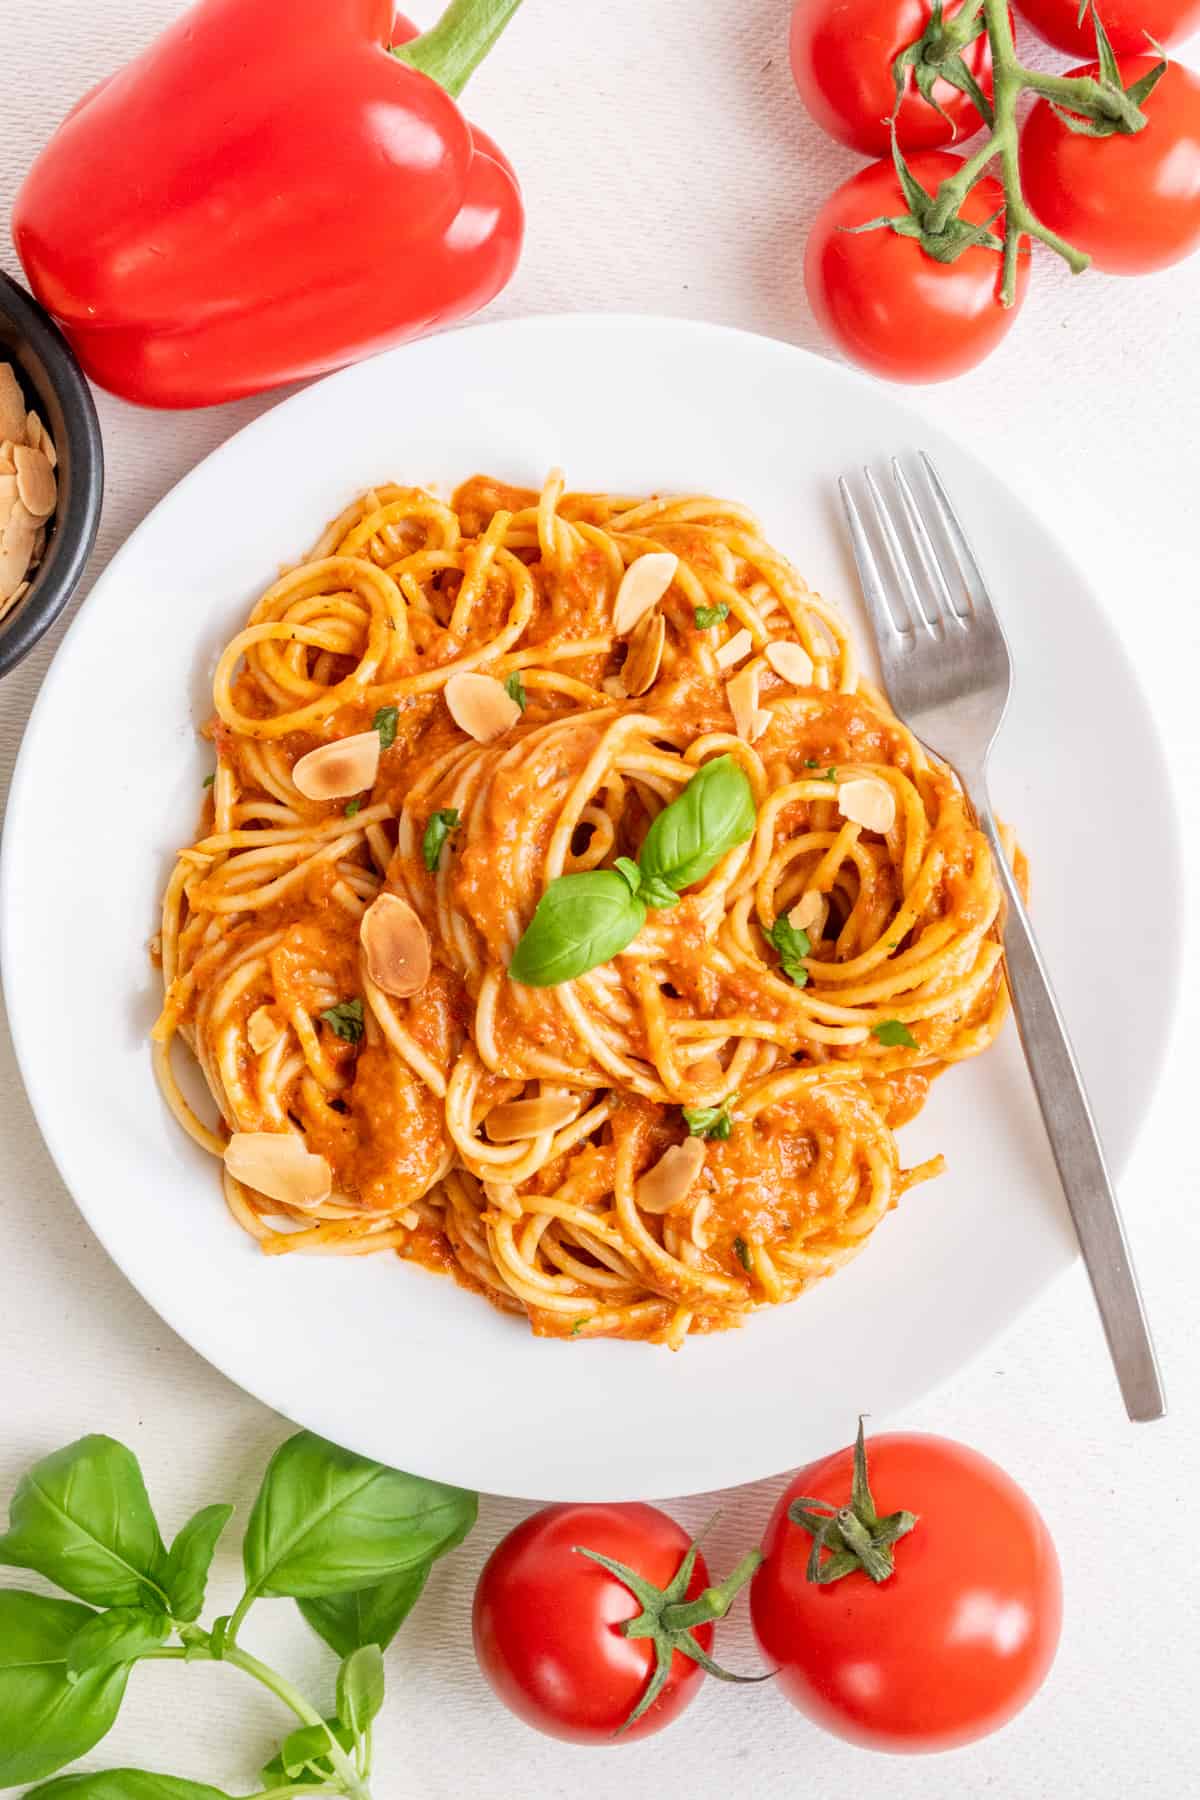 A plate of pasta with red pepper and tomato sauce, next to fresh tomatoes, a red pepper and herbs.